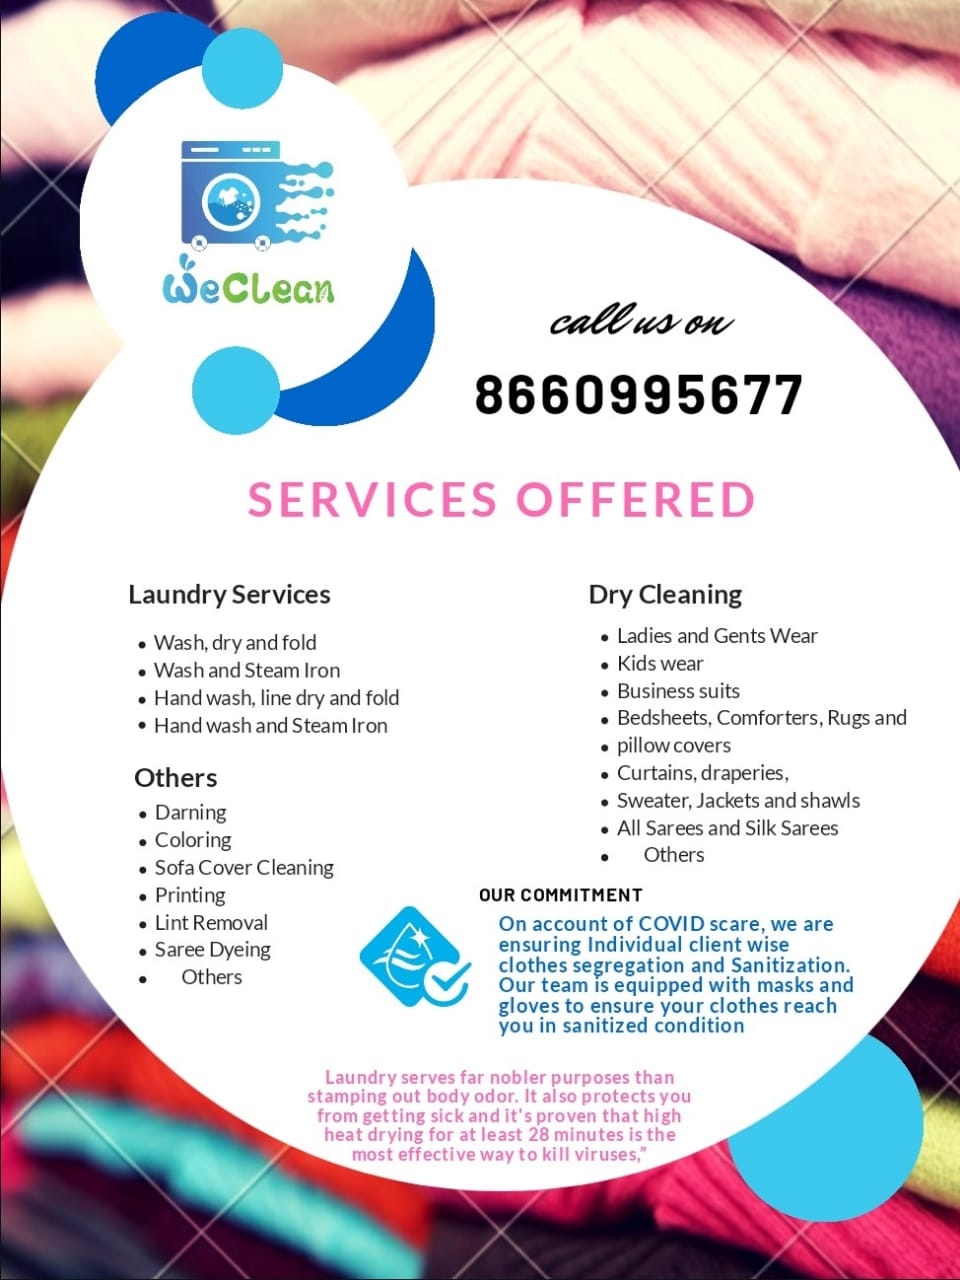 WeClean Dry Cleaning Services